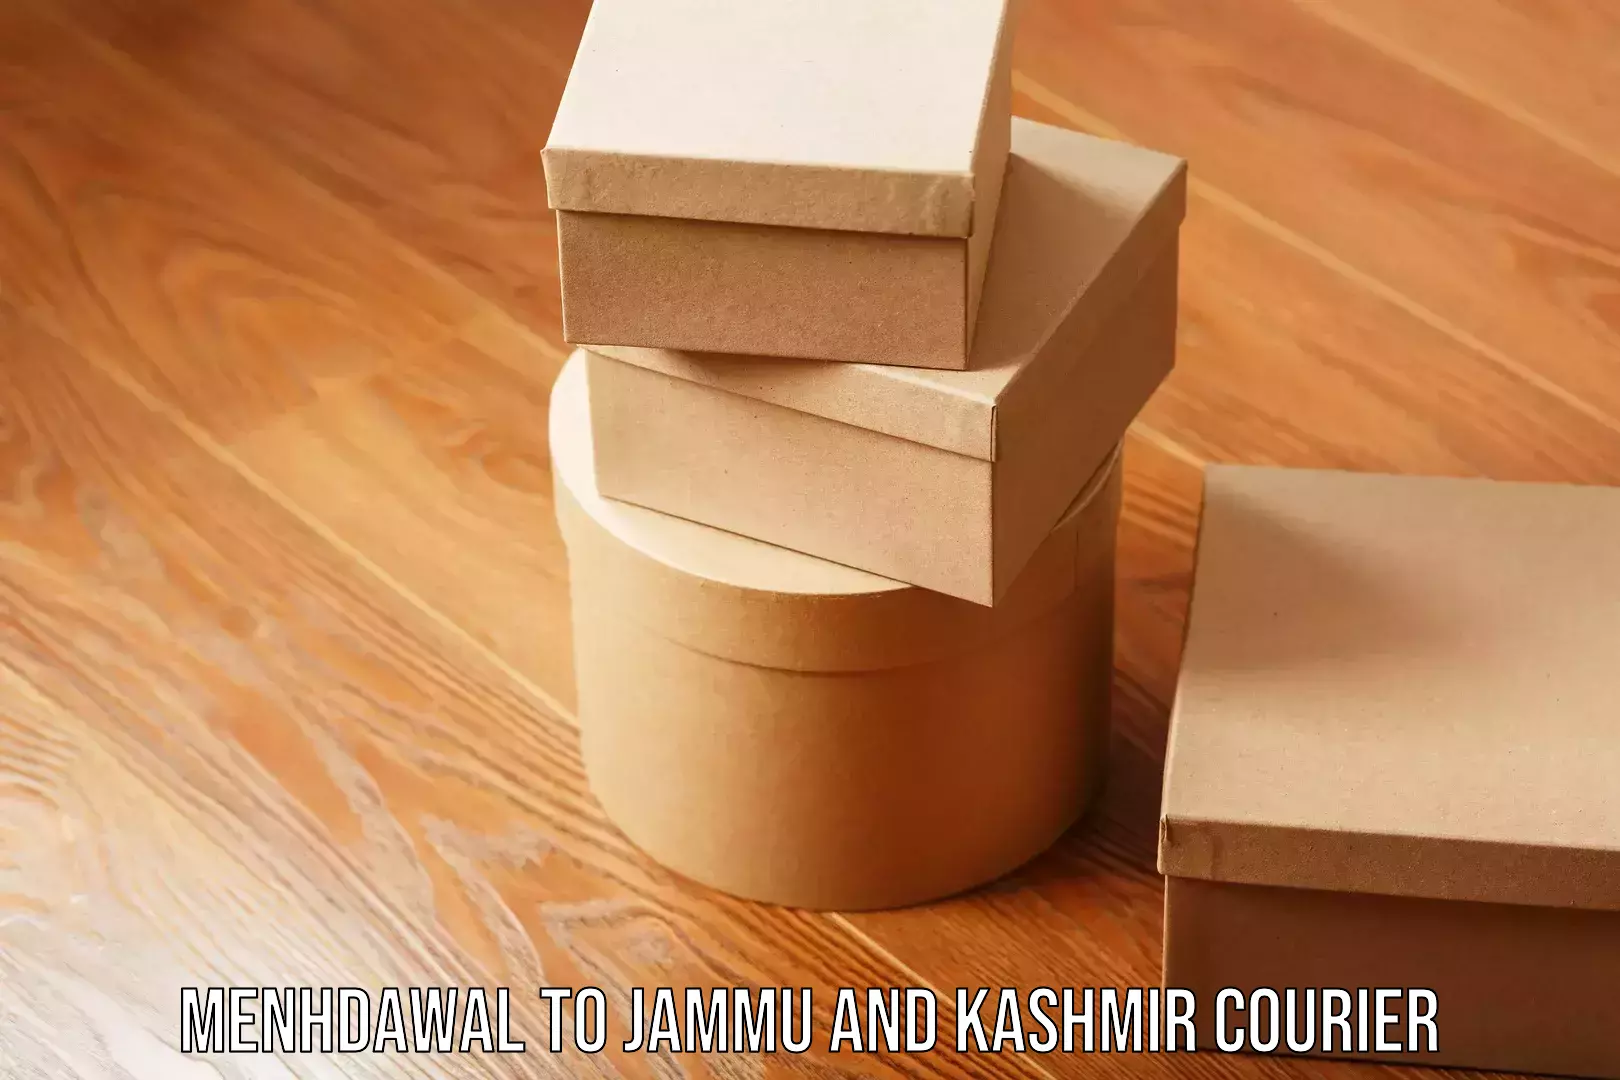 Comprehensive relocation services Menhdawal to Jammu and Kashmir